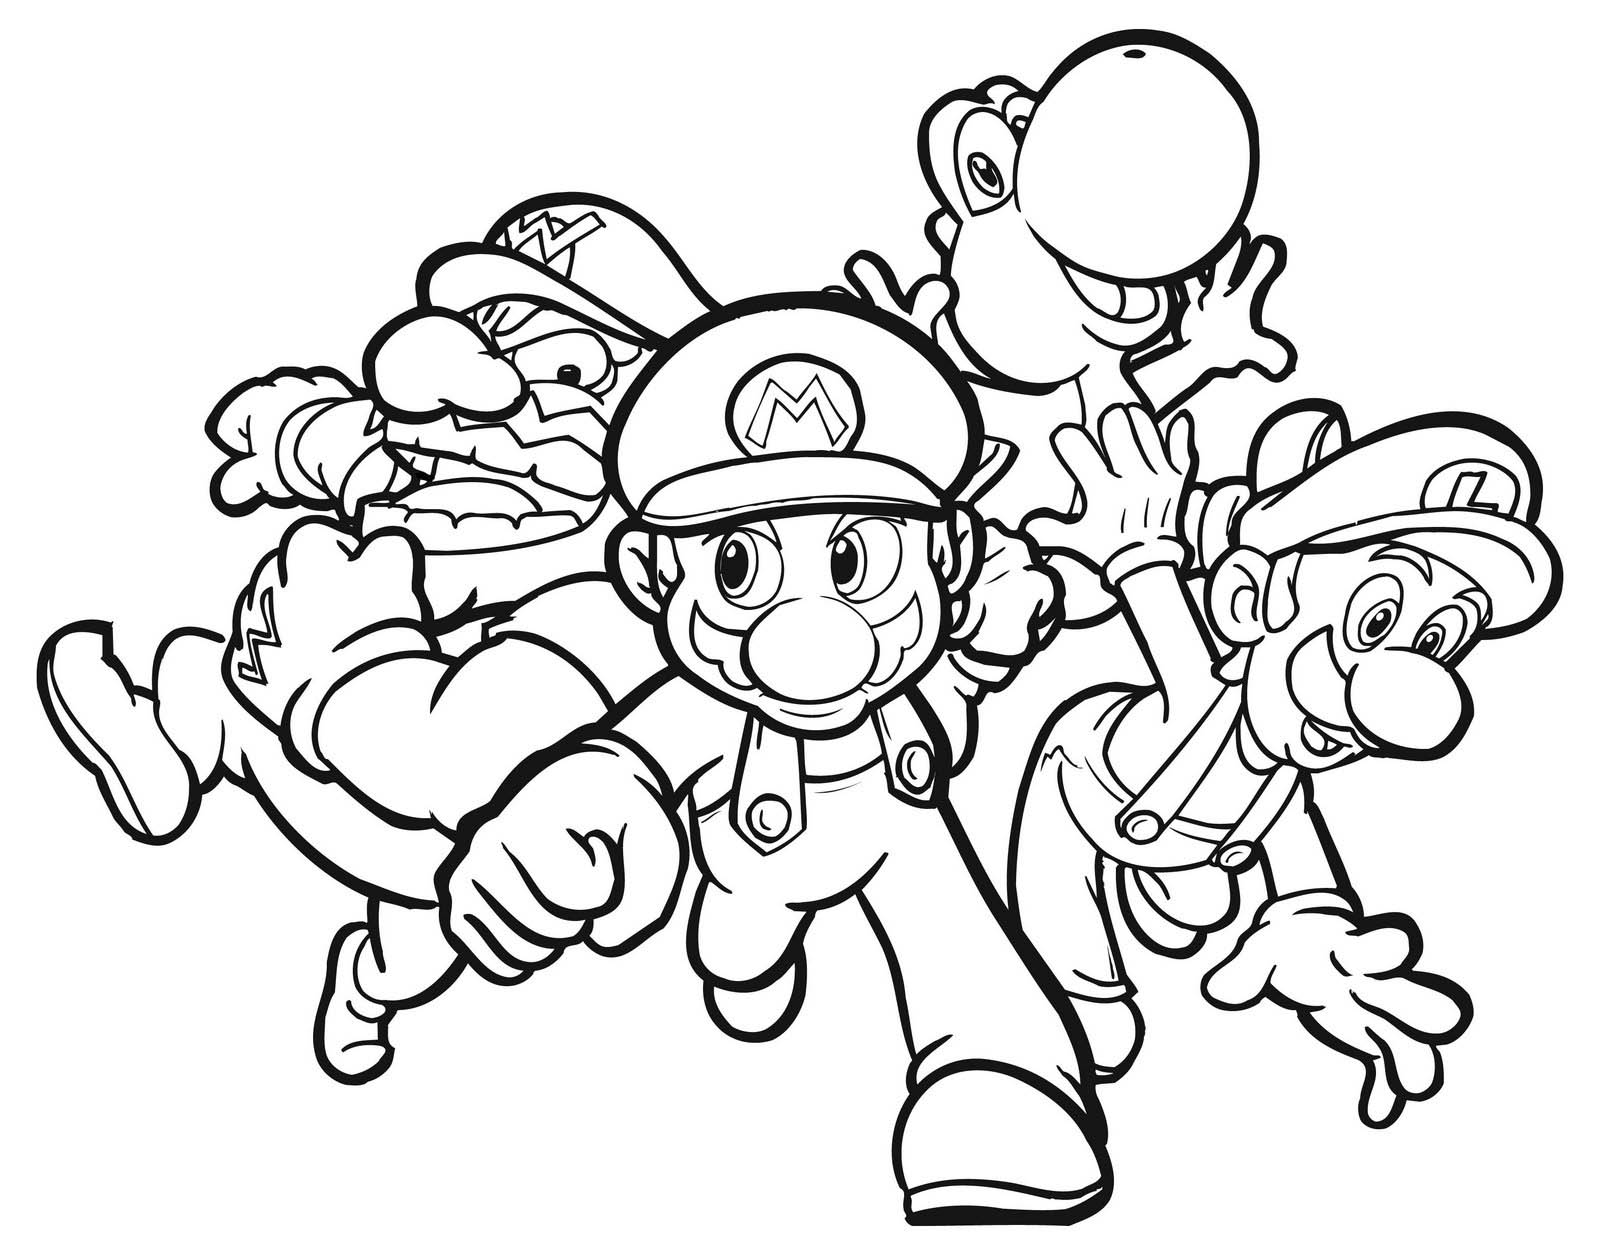 Super Mario Bros Coloring Pages Excellent Pdf to Print - Coloring ...